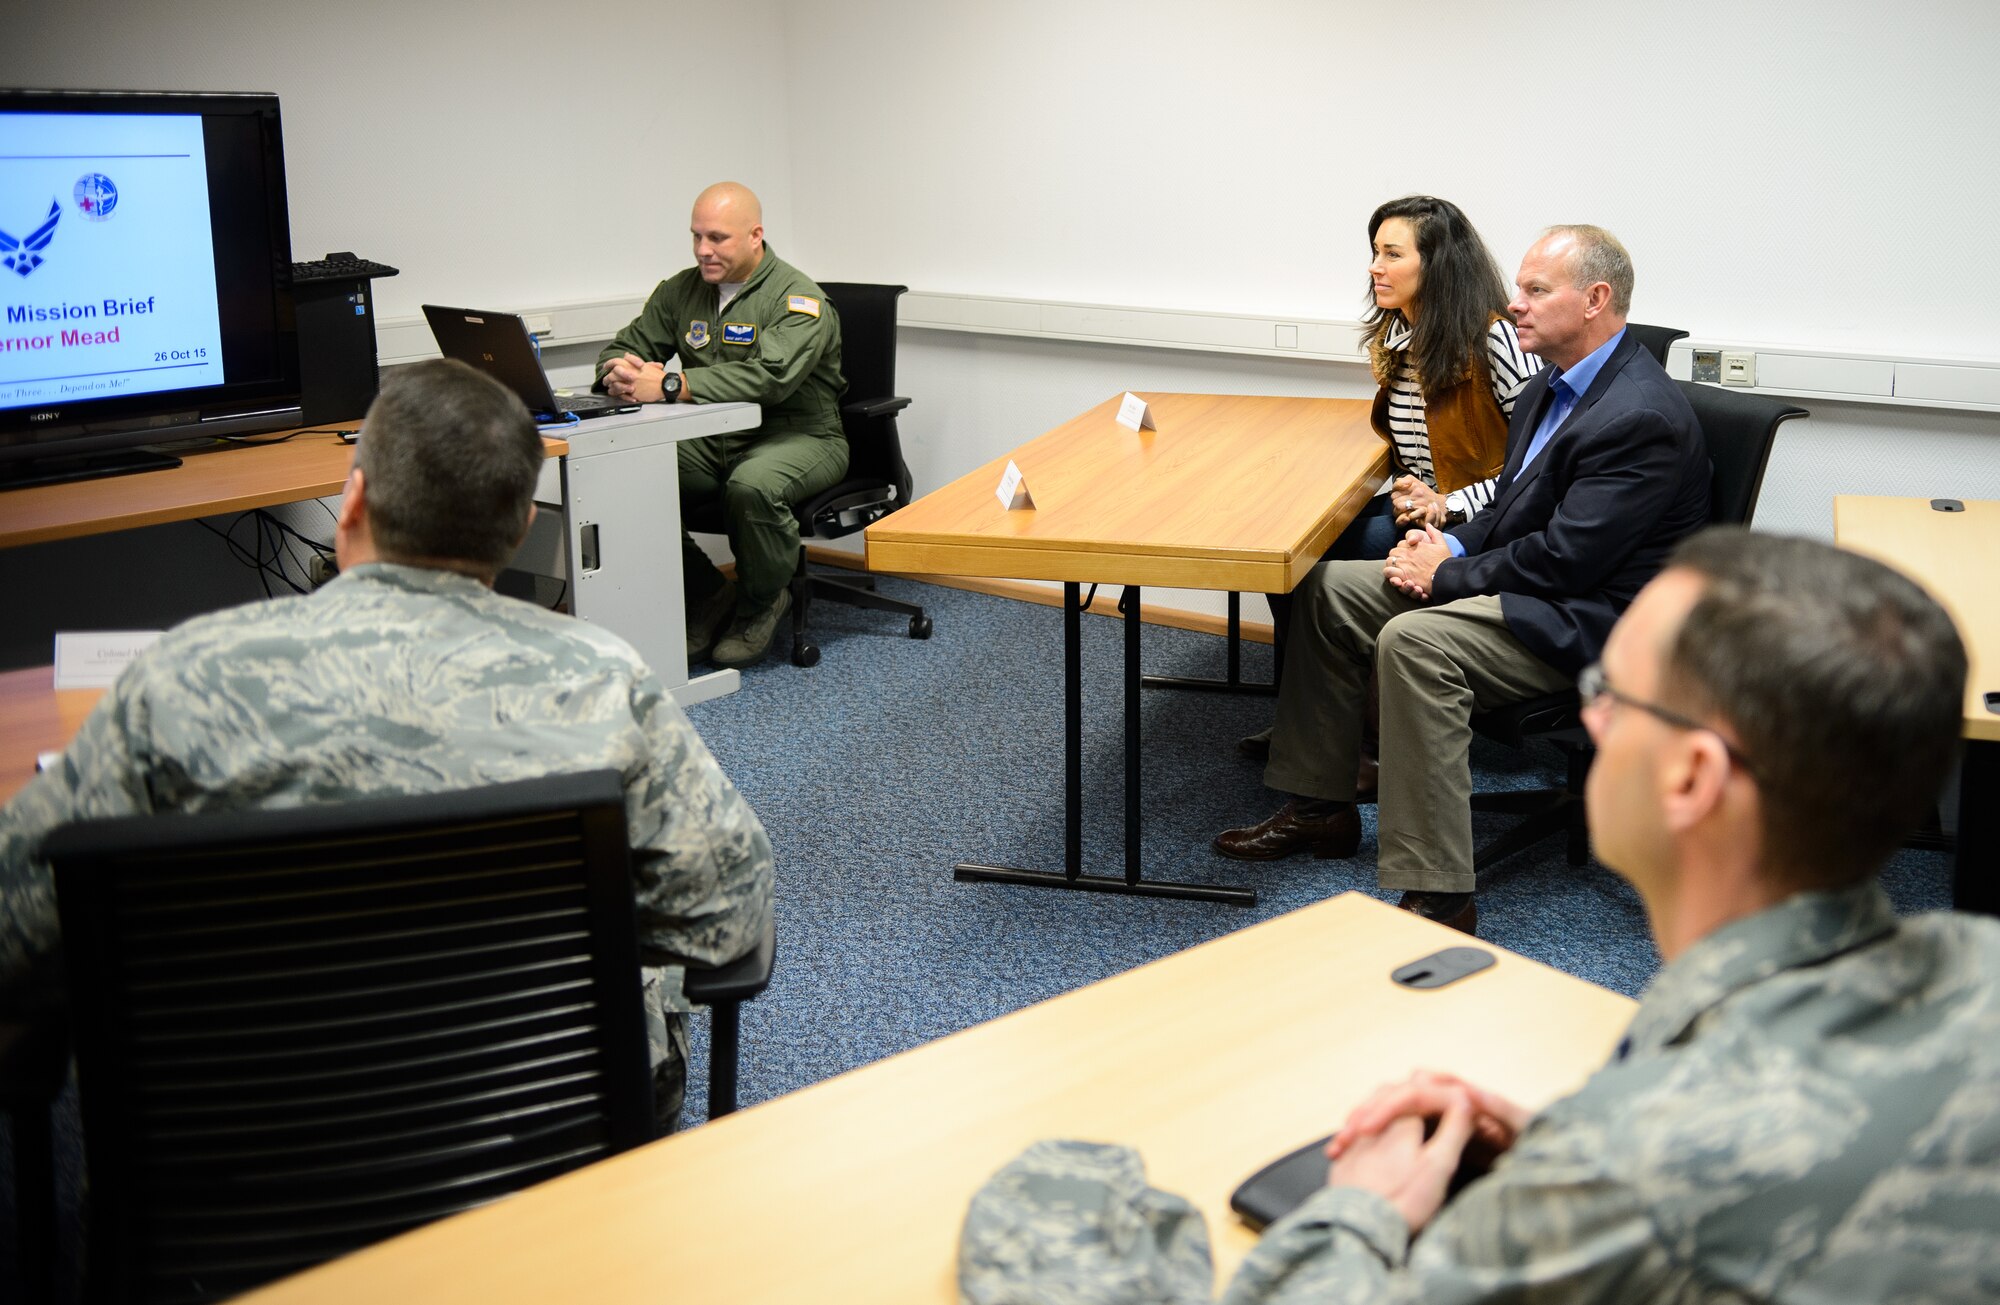 Wyoming Governor Matt Mead and his wife, Carol, listen to the 10th Expeditionary Aeromedical Evacuation Squadron commander’s brief on the operations conducted by the Wyoming Airmen deployed to the 10th EAES Oct. 26, 2015, at Ramstein Air Base, Germany. Twelve Airmen from the Wyoming Air National Guard joined active-duty and reserve Airmen throughout the year in saving more than 2,500 lives. (U.S. Air Force photo/Staff Sgt. Armando A. Schwier-Morales)